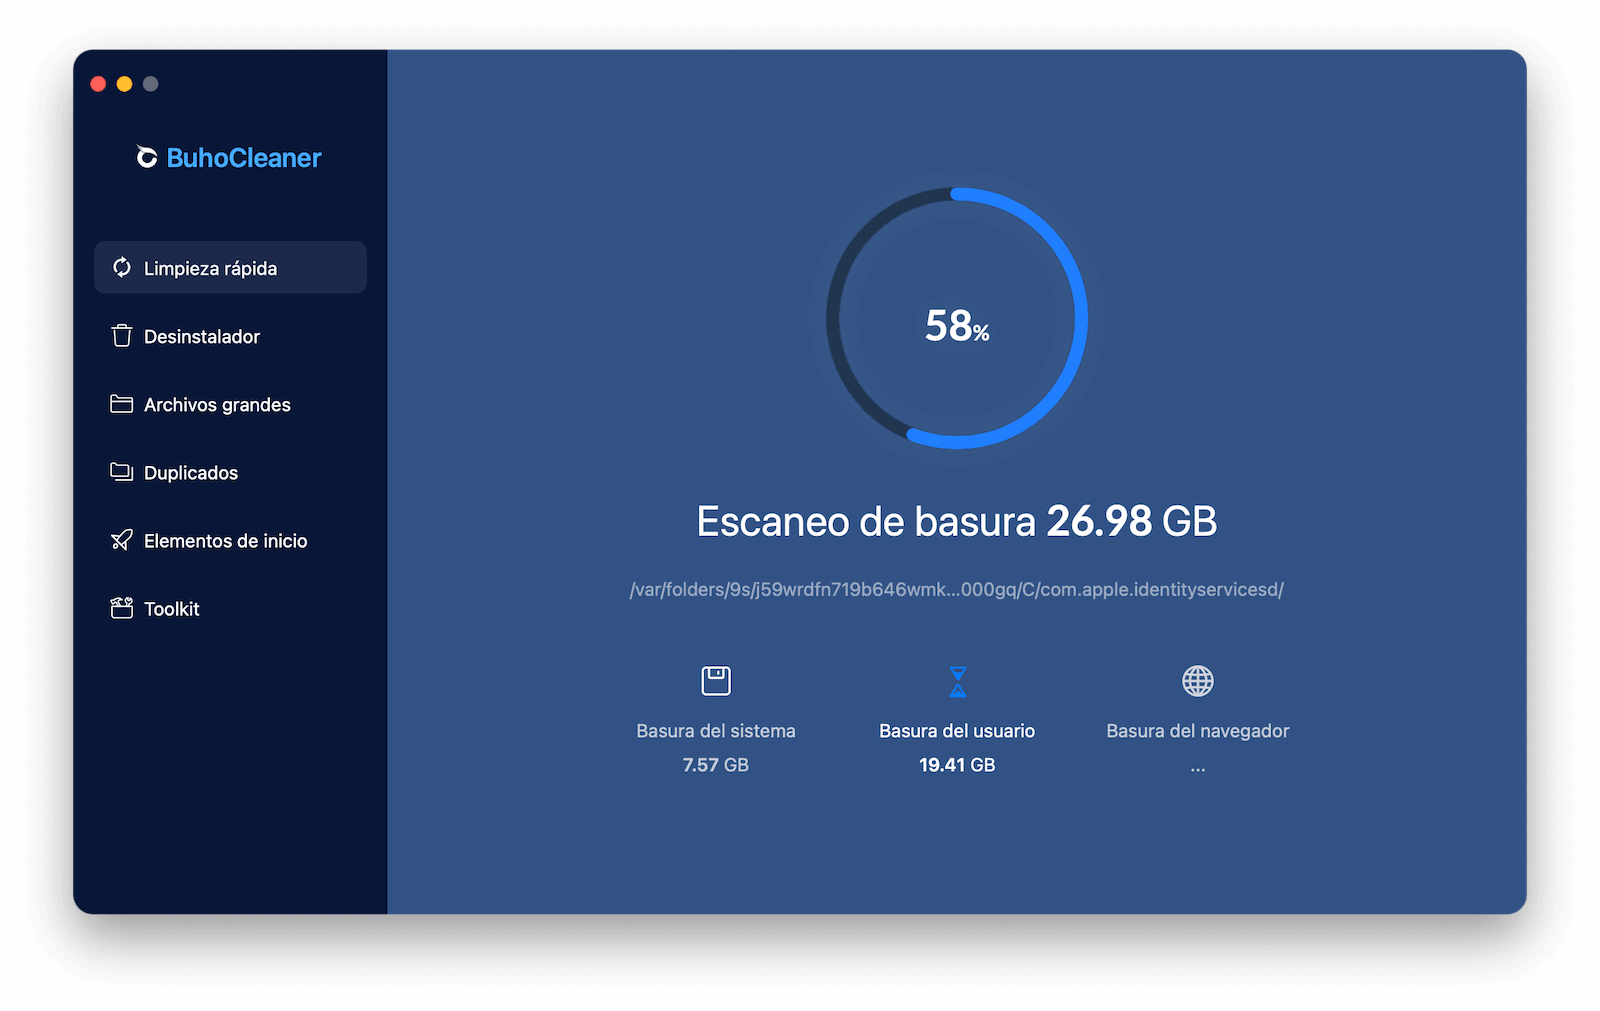 clear-disk-space-buhocleaner.png